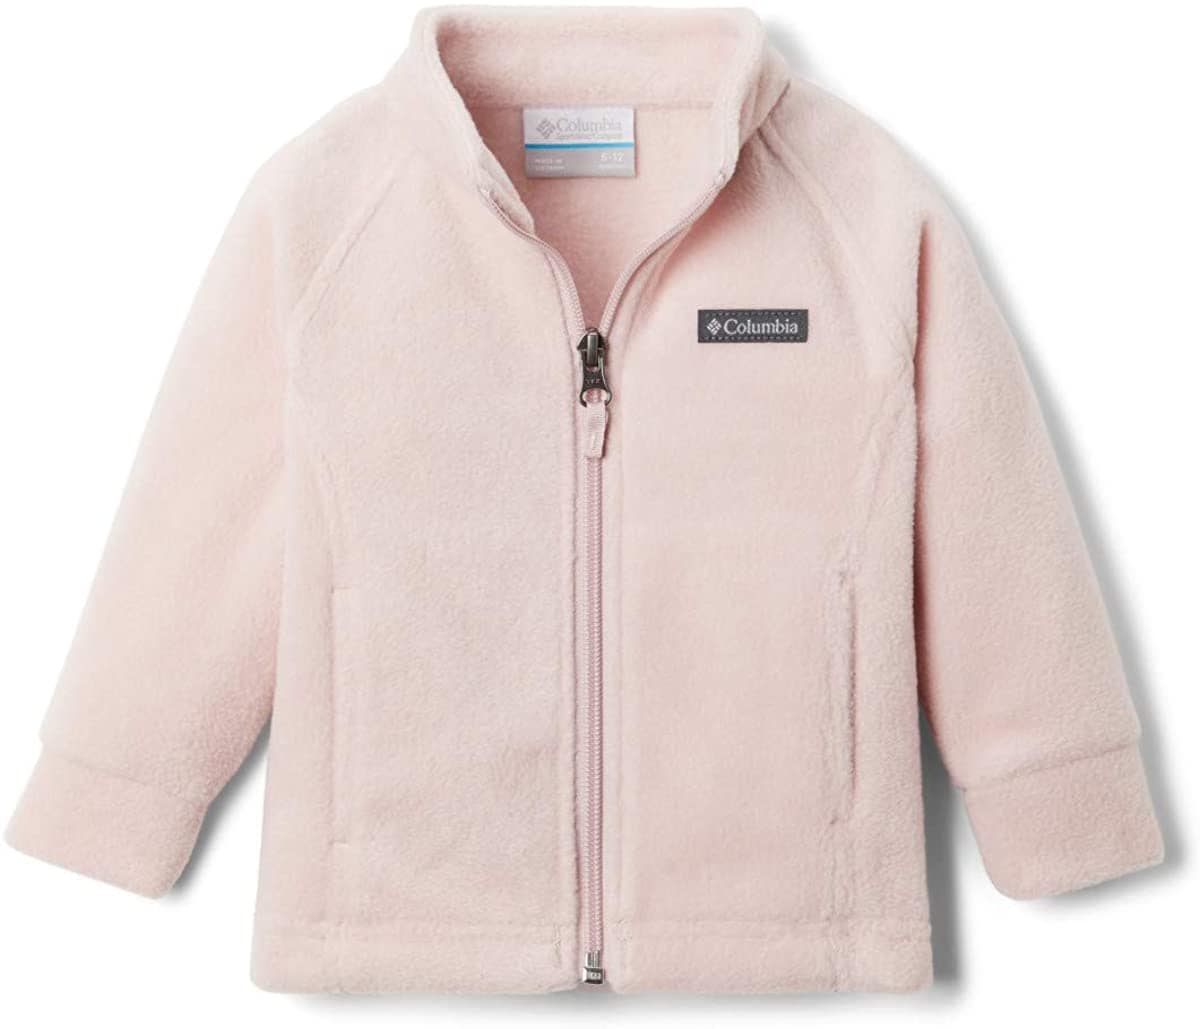 The Benton Springs for girls offers insulation in a versatile, everyday style